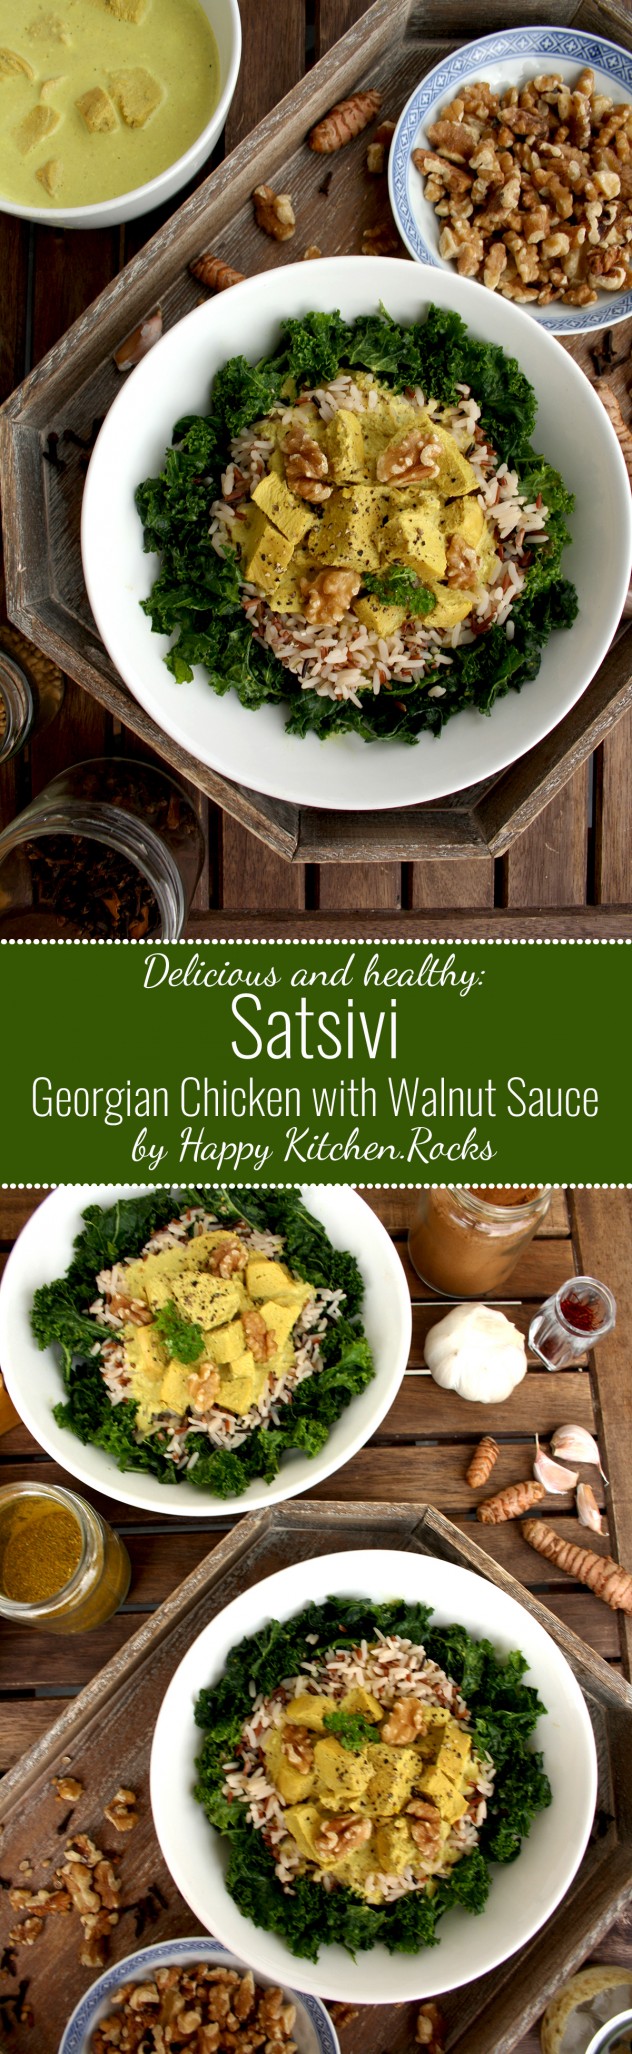 Satsivi: Georgian Chicken with Walnut Sauce. Delicious, wholesome, easy and flavorful 20 minutes dinner recipe. Comforting, aromatic and healthy dish.